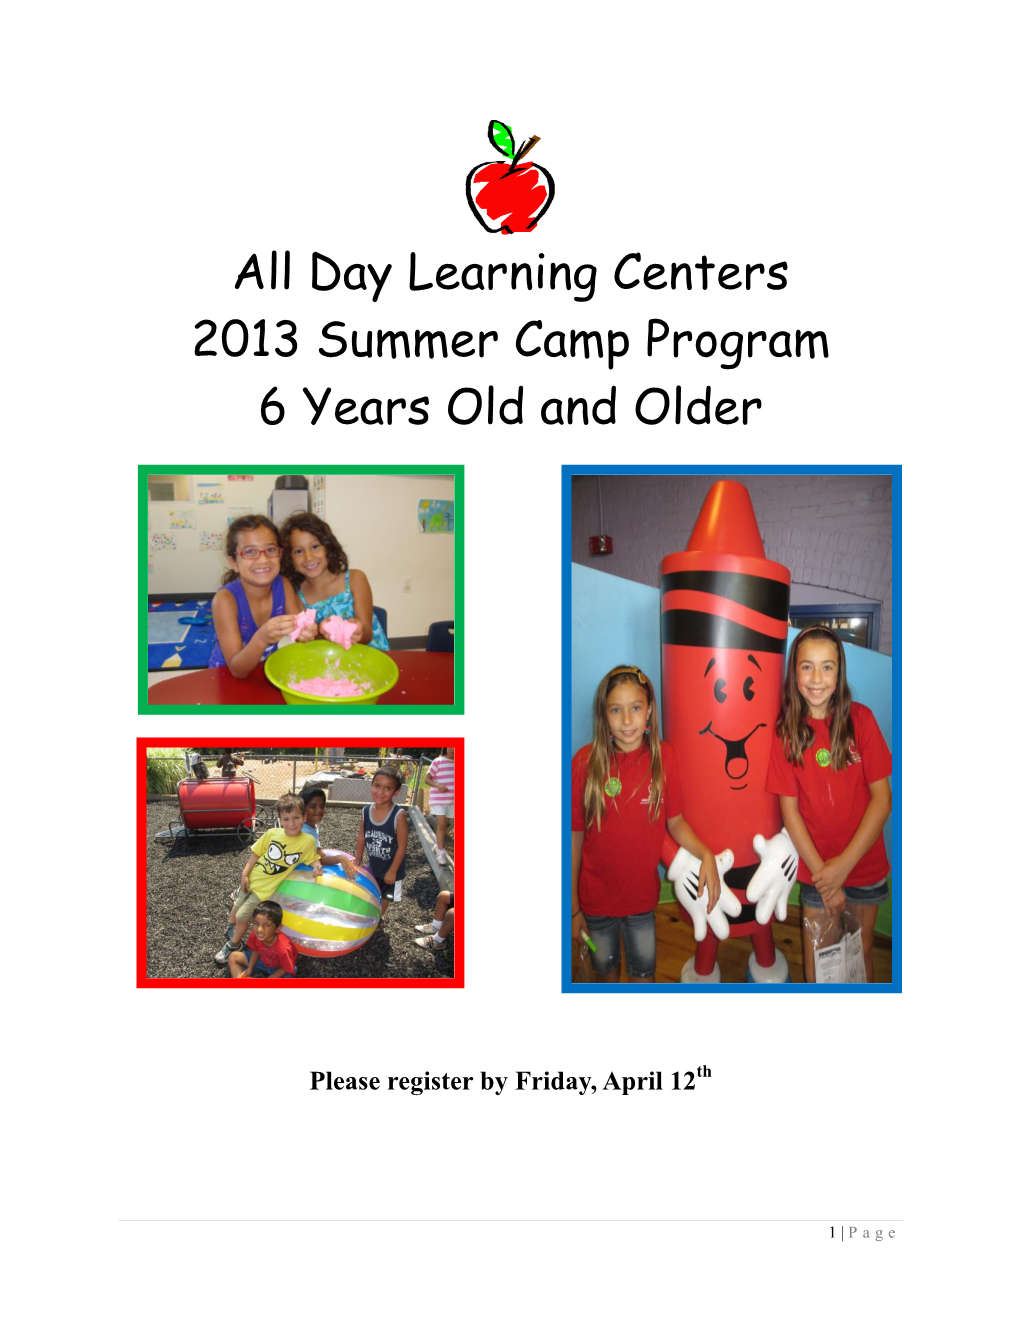 All Day Learning Centers 2013 Summer Camp Program 6 Years Old and Older